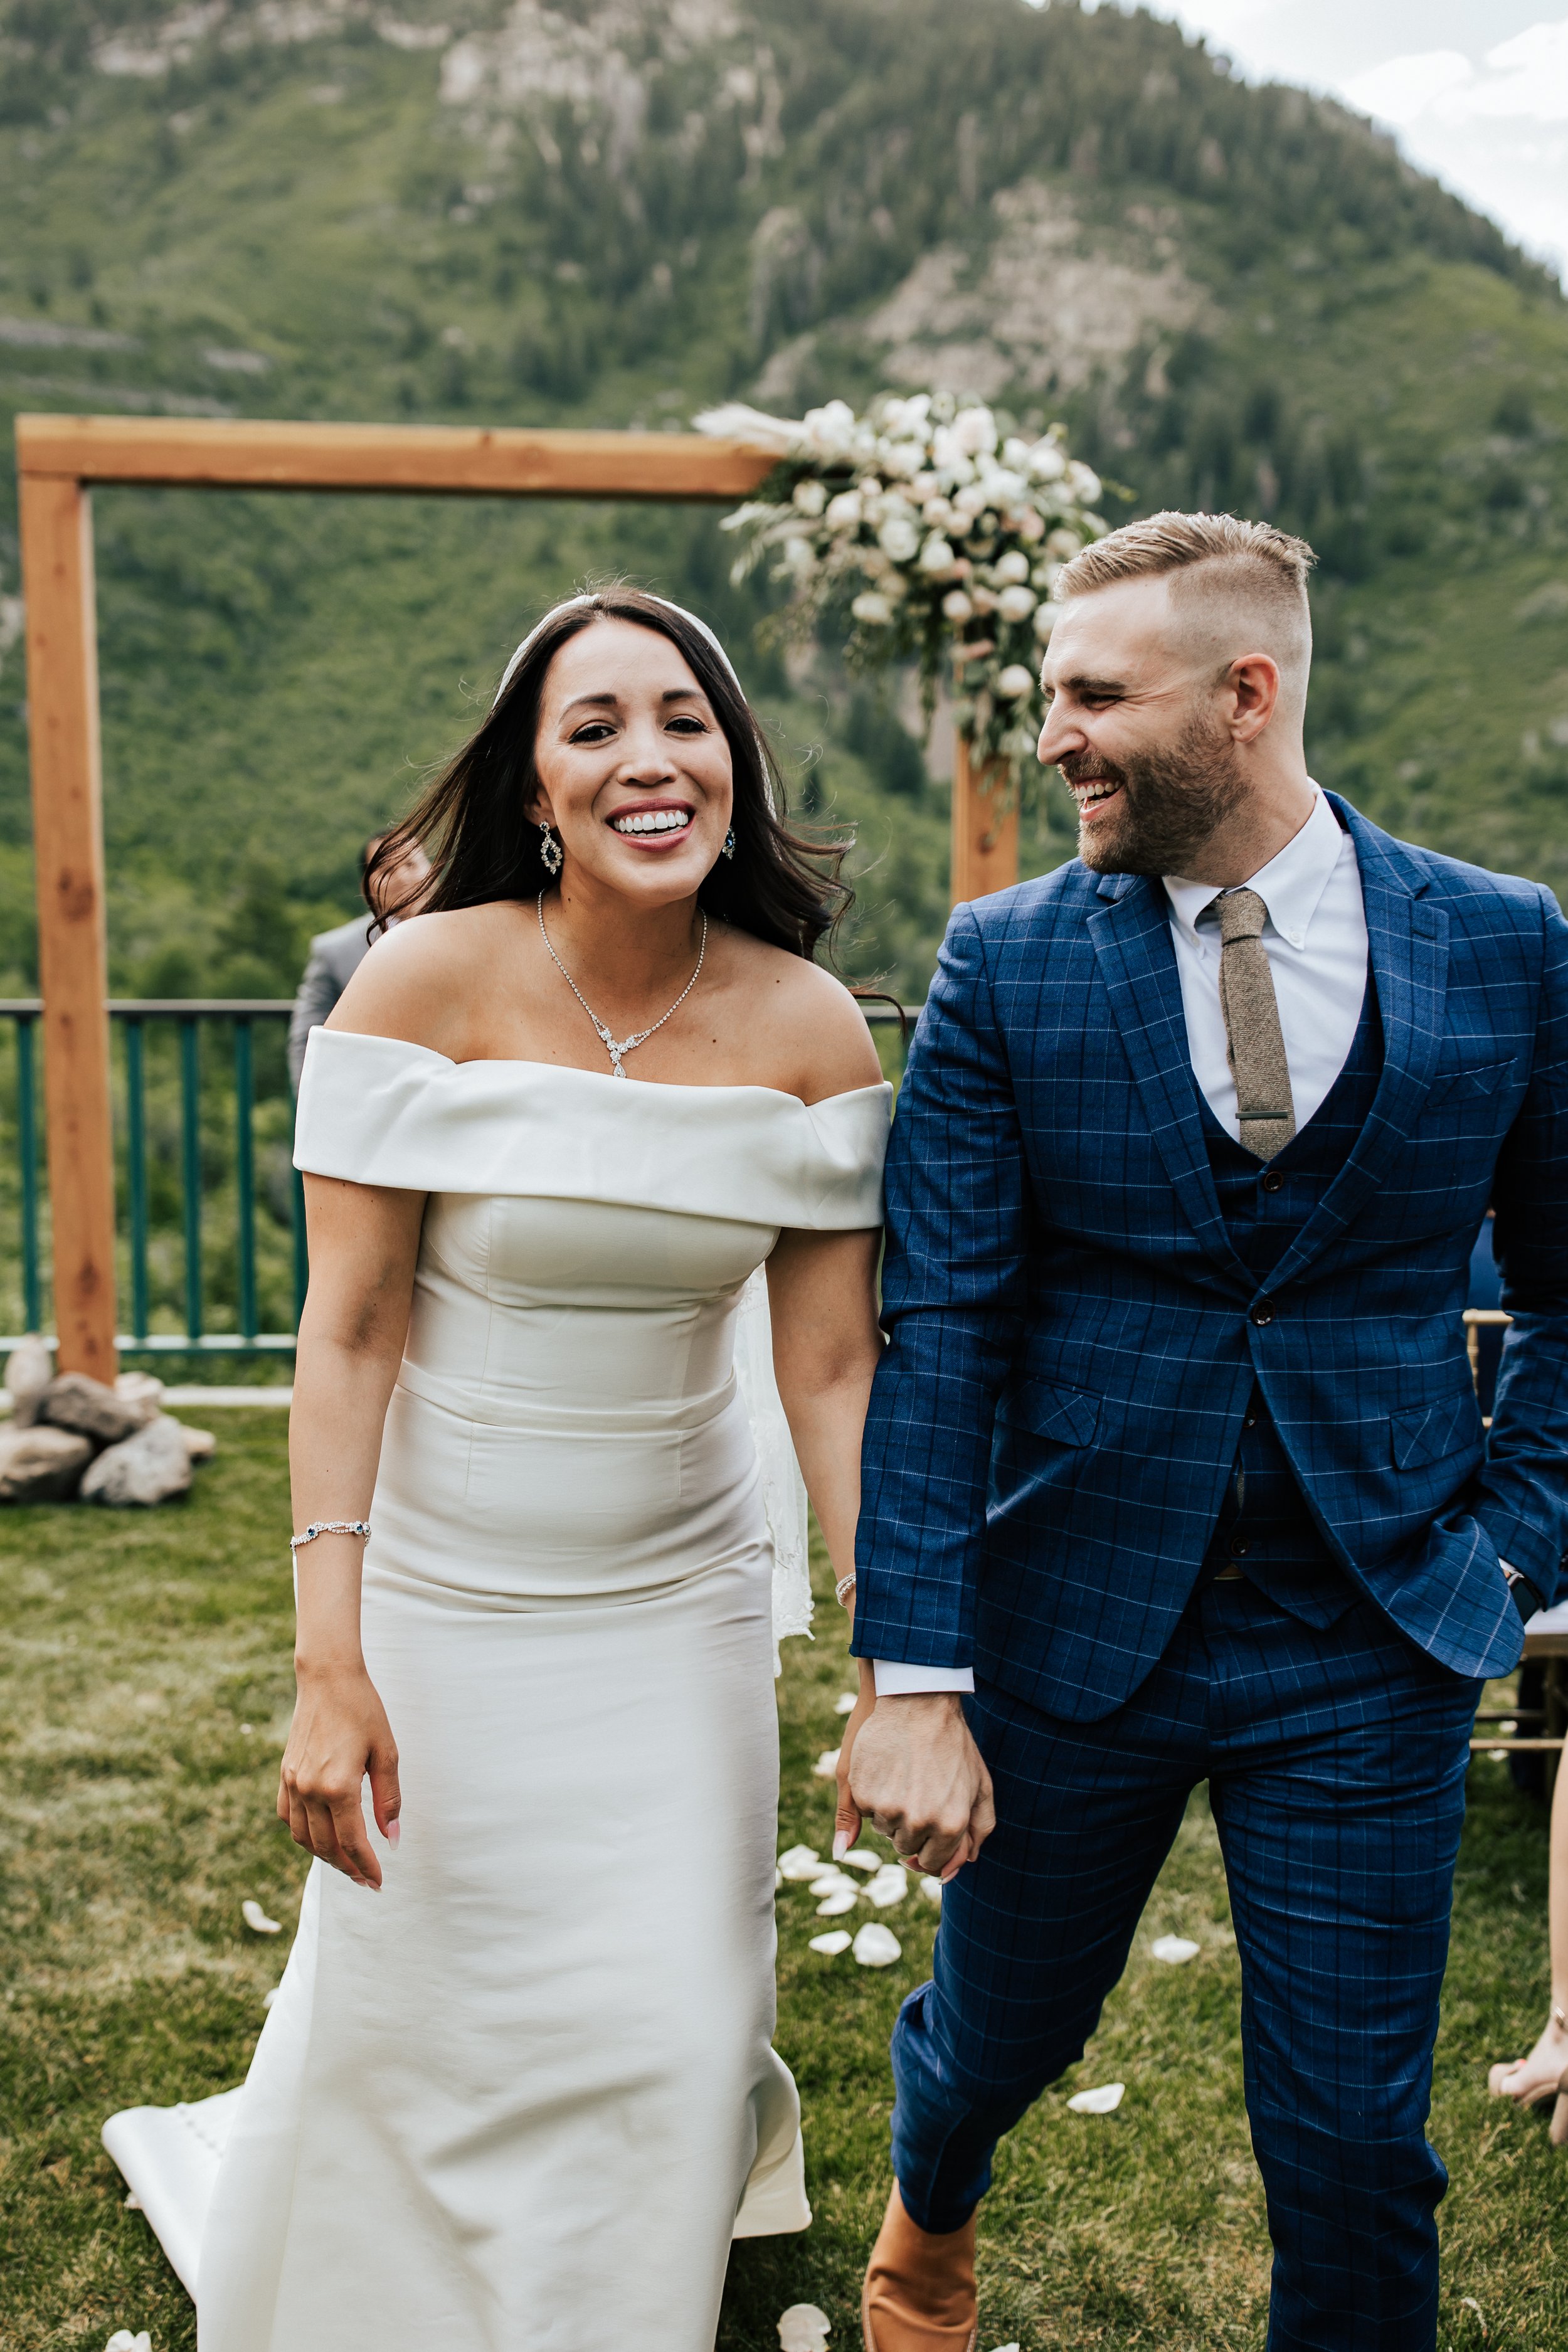  Couple walks down aisle as husband and wife after wedding ceremony. Bride and groom laugh together after getting married. Sundance, Utah wedding ceremony with the sun setting behind Mt. Timpanogos and Stewart Falls in view. Beautiful summer wedding 